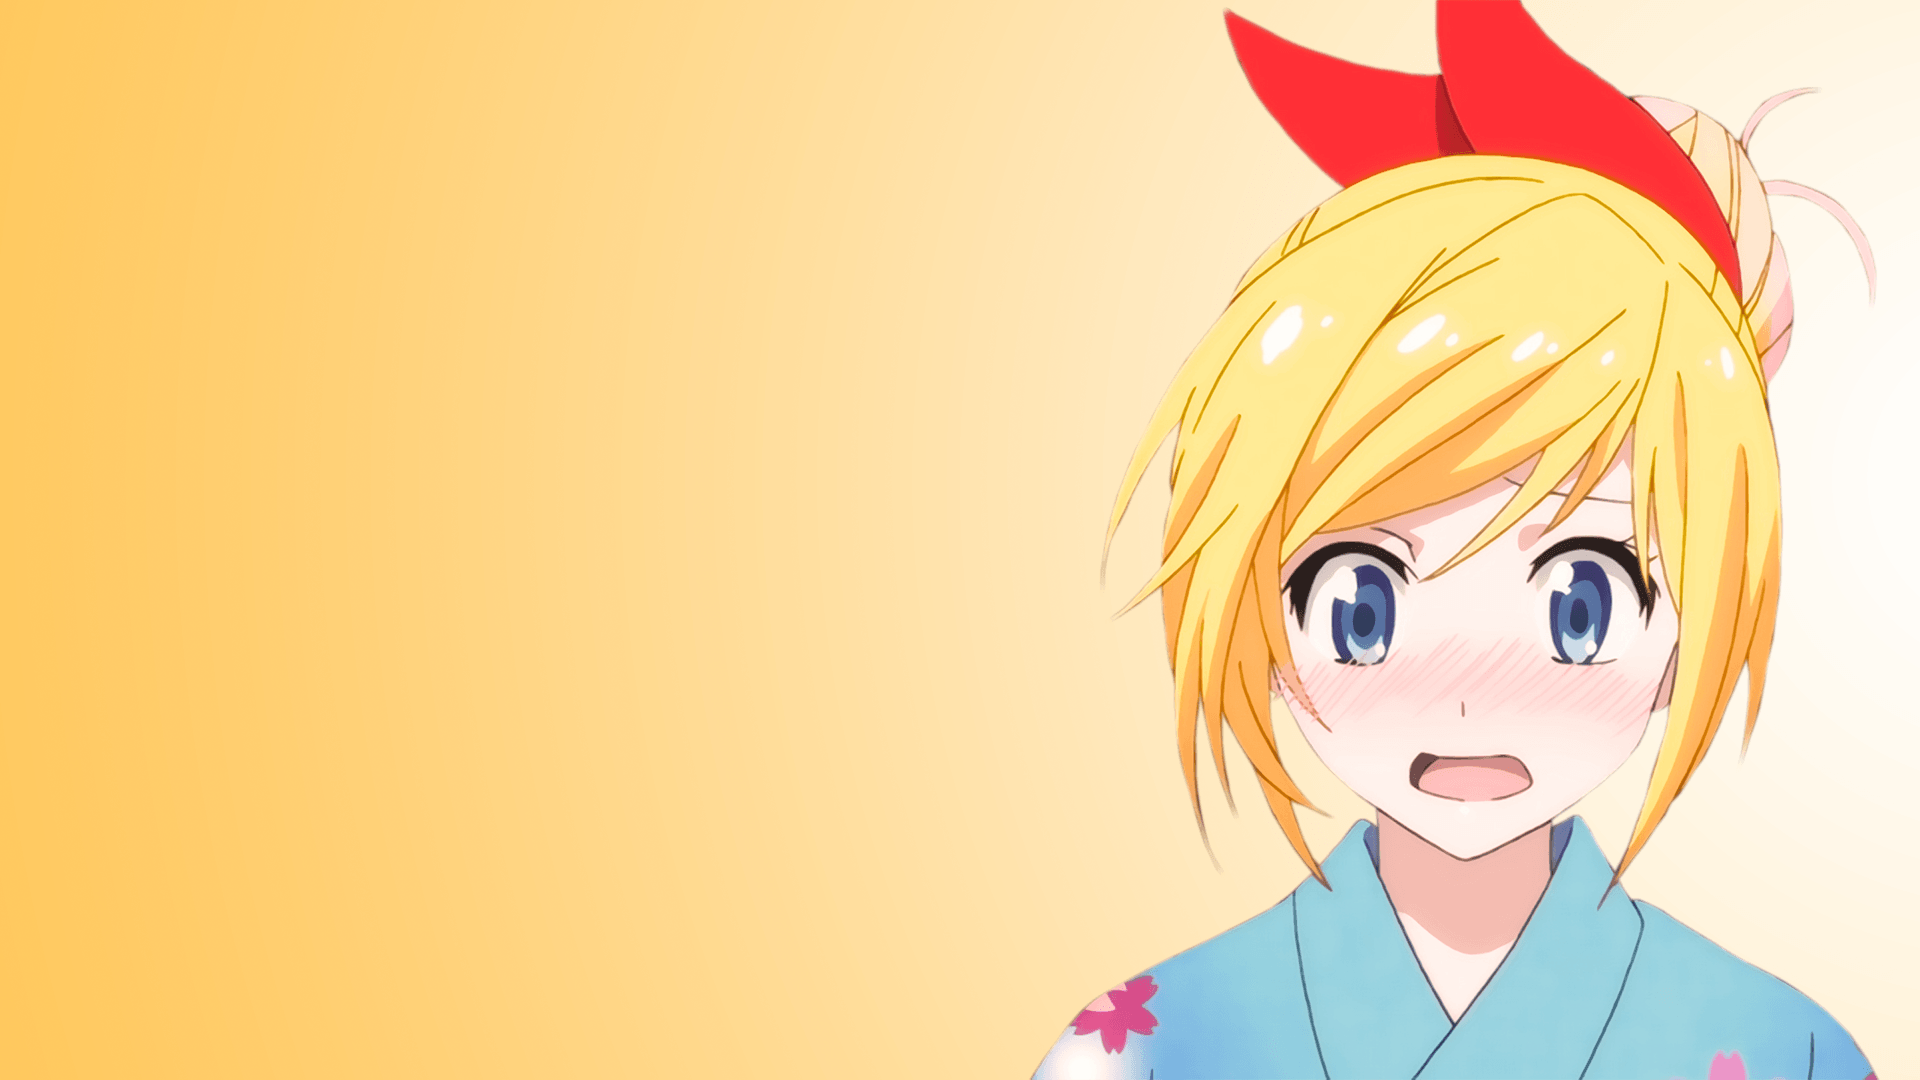 My first time making a wallpaper, any tips? (Nisekoi) 1920x1080